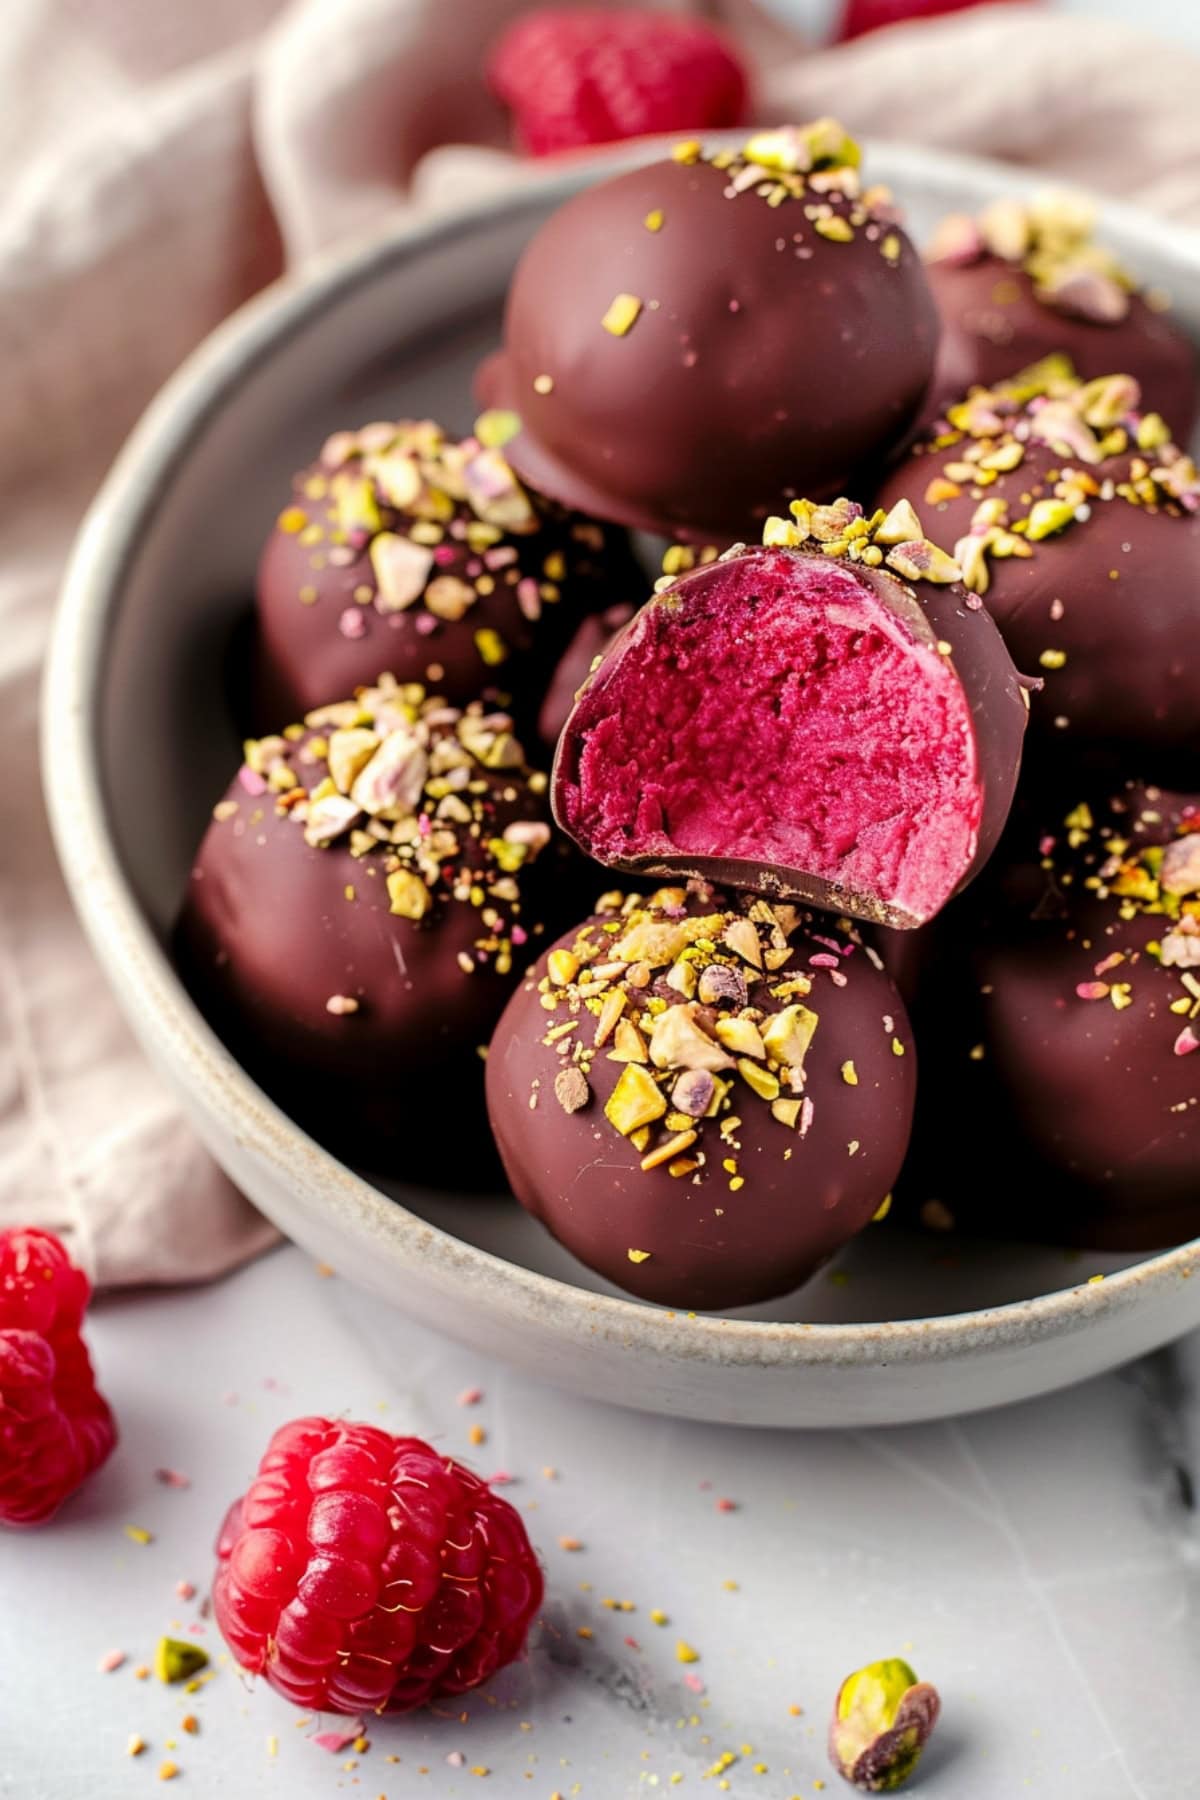 A bowl of white chocolate raspberry truffles coated in dark chocolate and topped with pistachio nuts